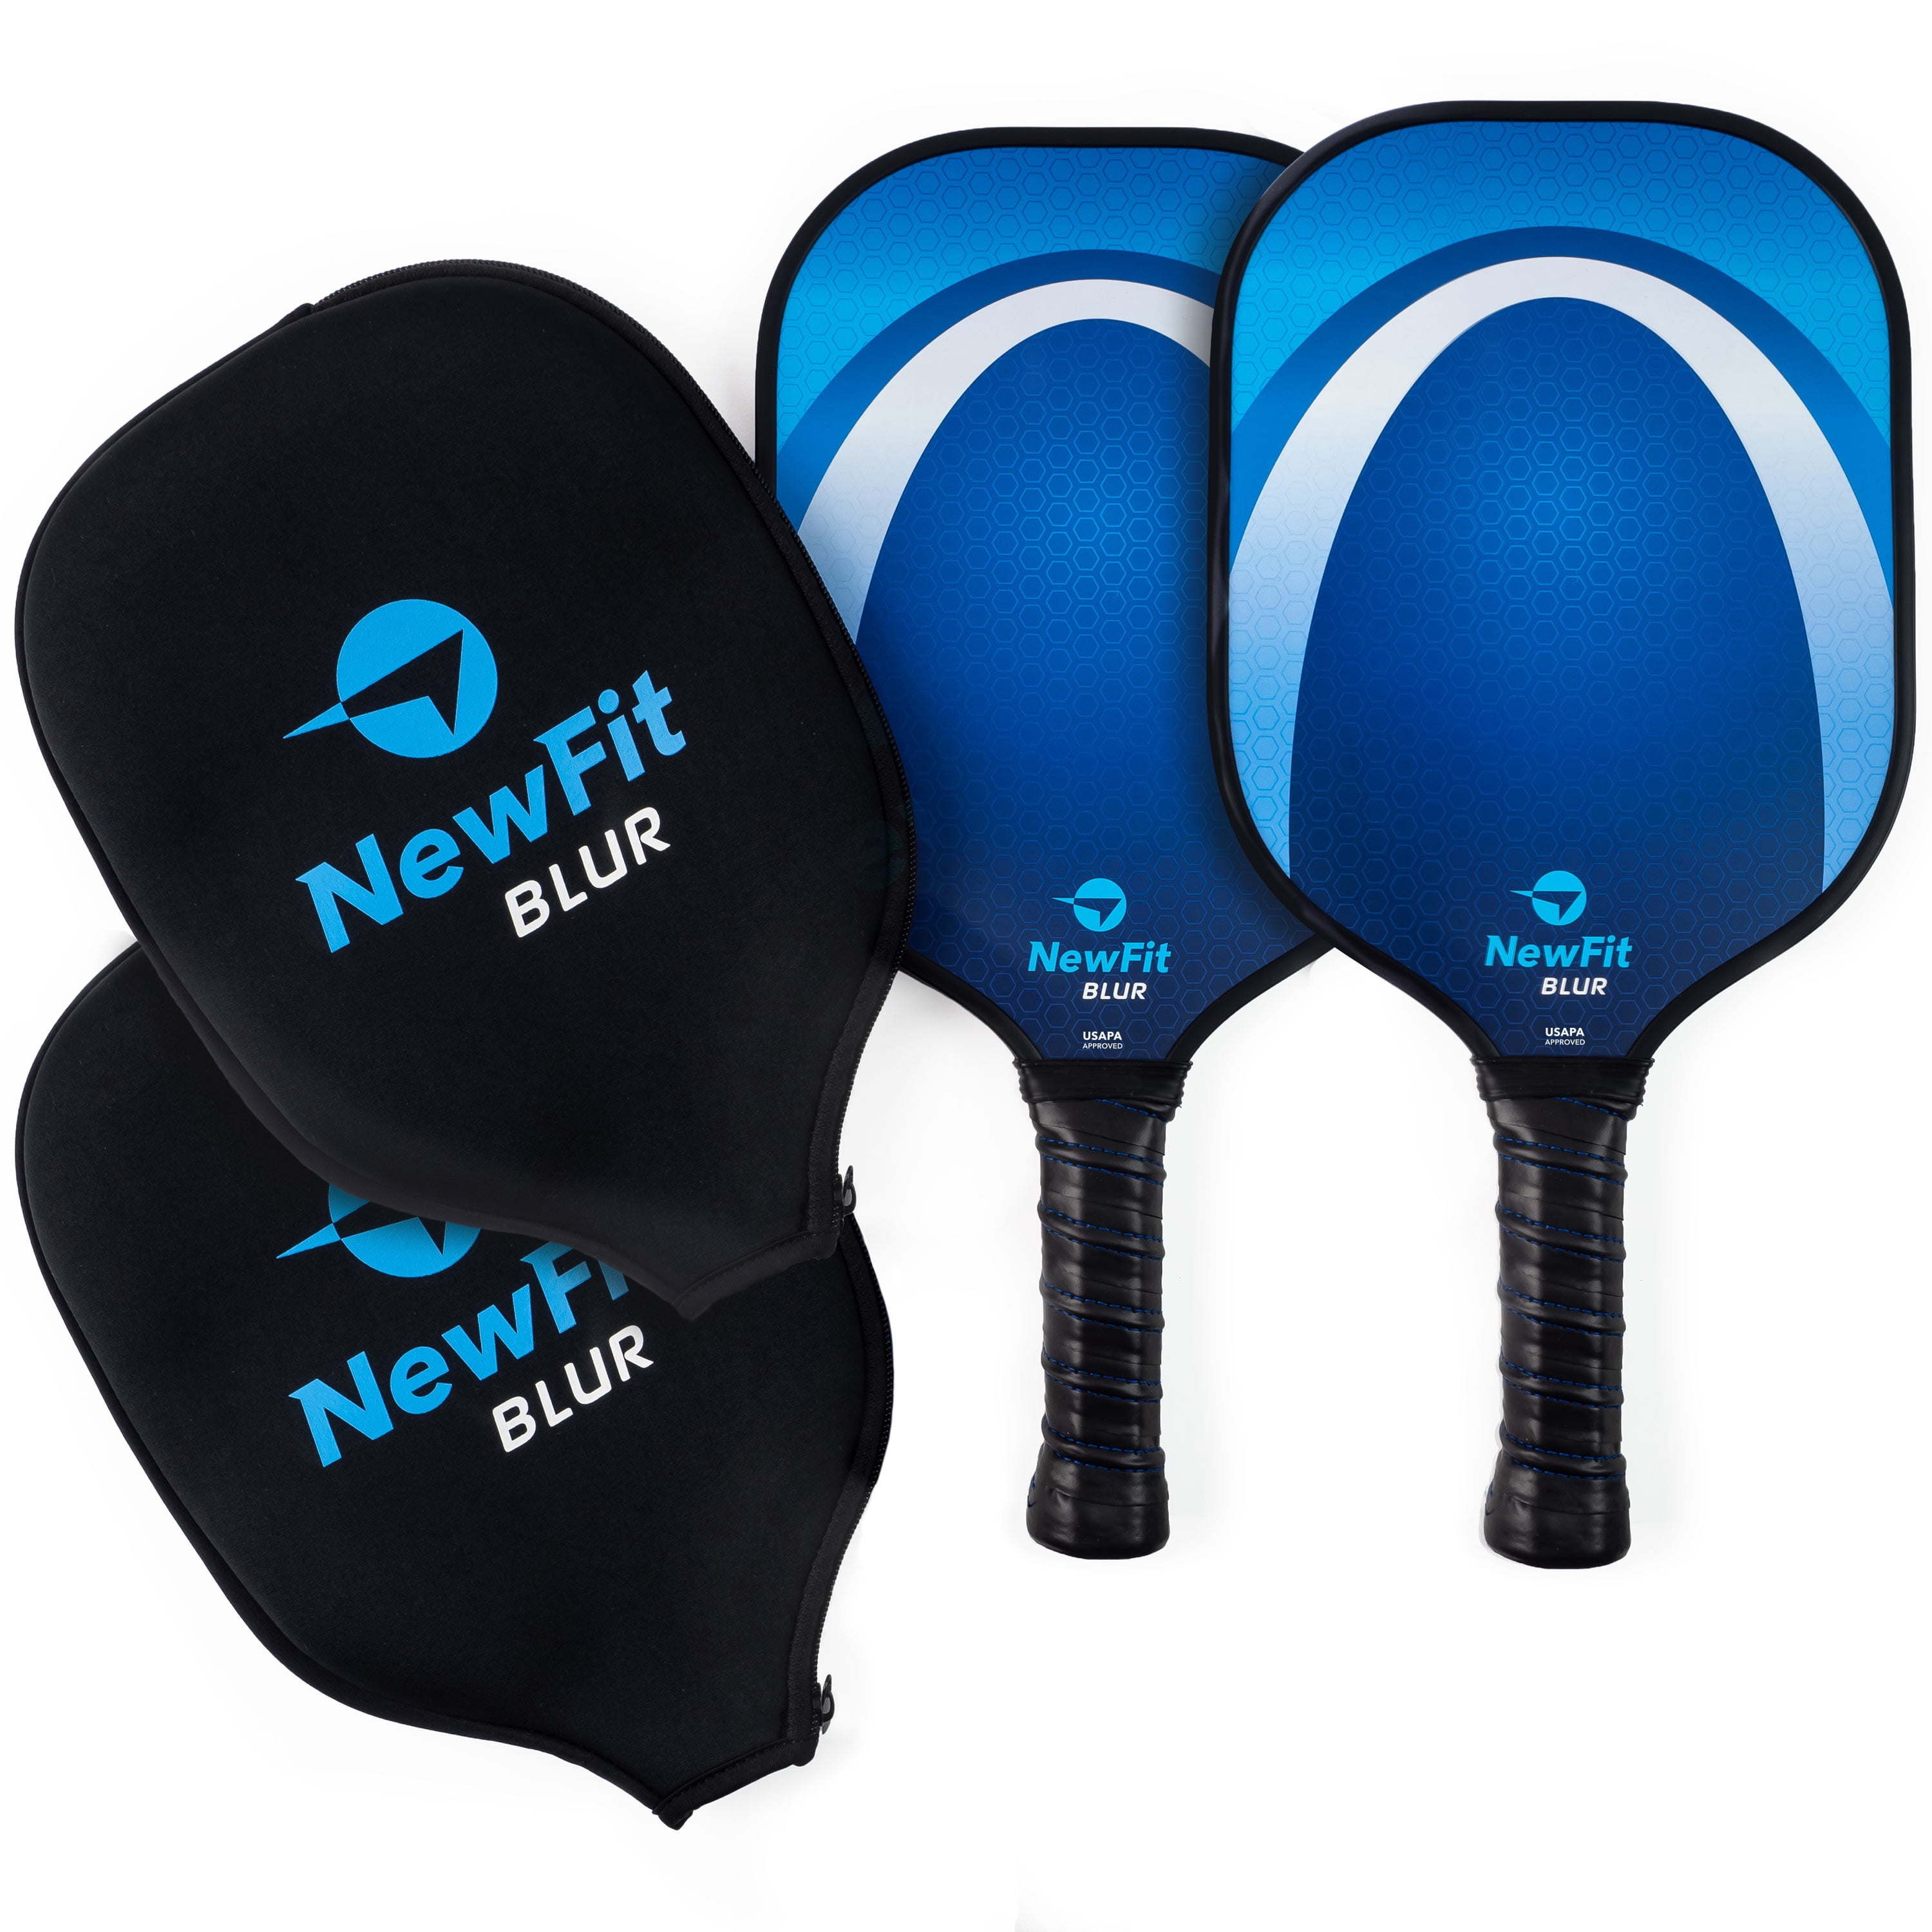 Durable Balls Overgrips Ultra Cushion Grip & Upgrade Racquet A11N SPORTS Covers A11N Premium Pickleball Paddle Set Graphite Face and Honeycombed Polymer Core Paddles Drawstring Bag 